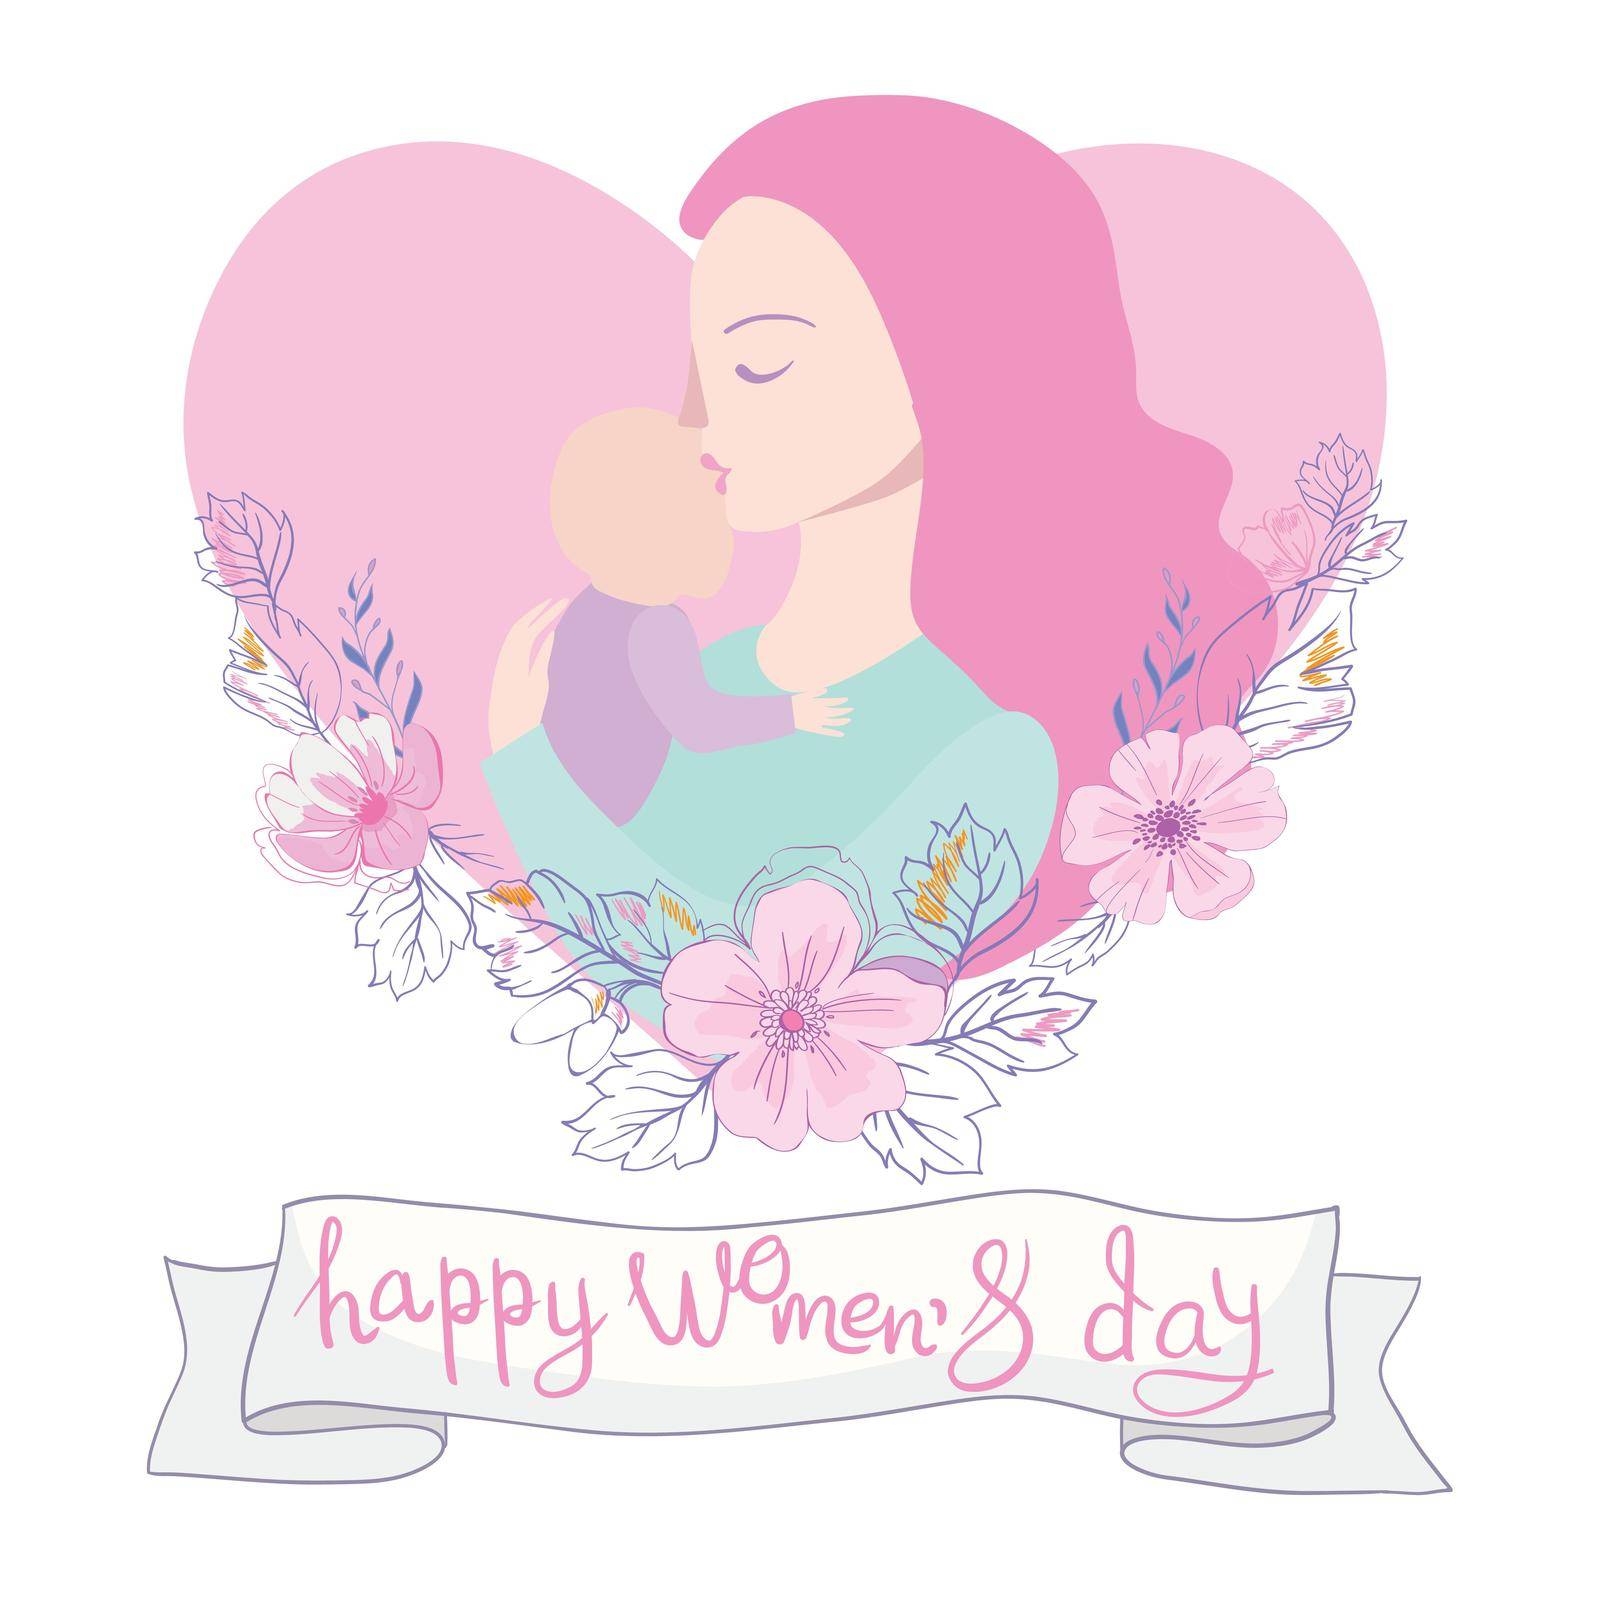 Mother holding her cute baby child vector flat illustration with flower botanical leaf ornament background for happy mother's day poster concept design